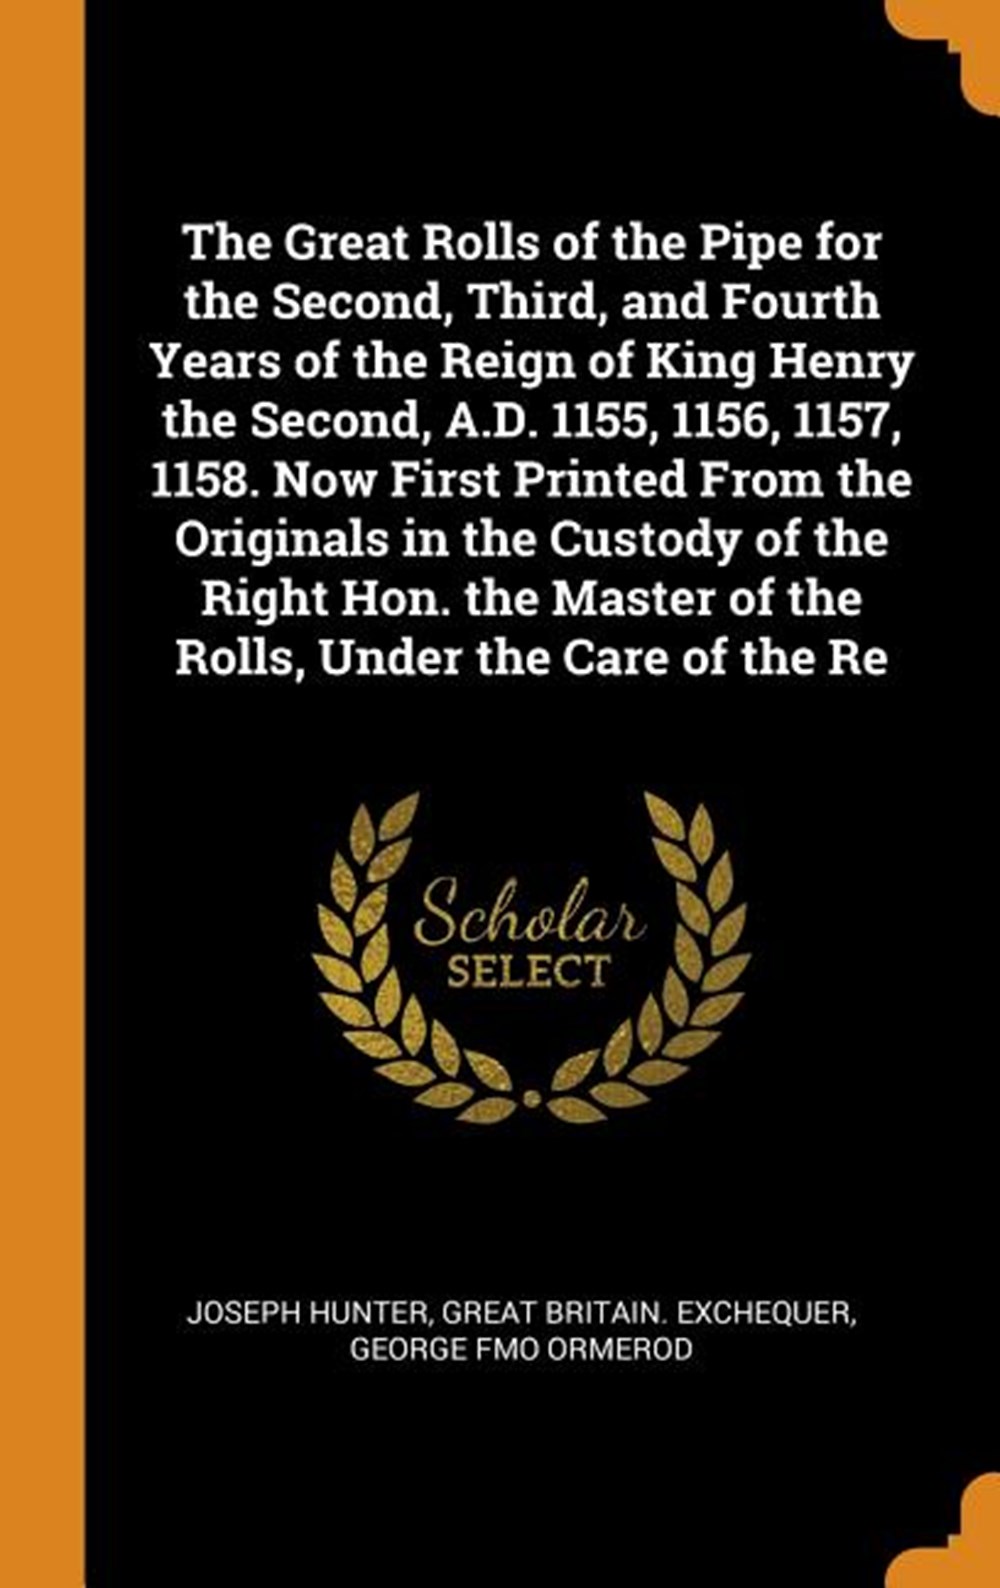 Great Rolls of the Pipe for the Second, Third, and Fourth Years of the Reign of King Henry the Secon